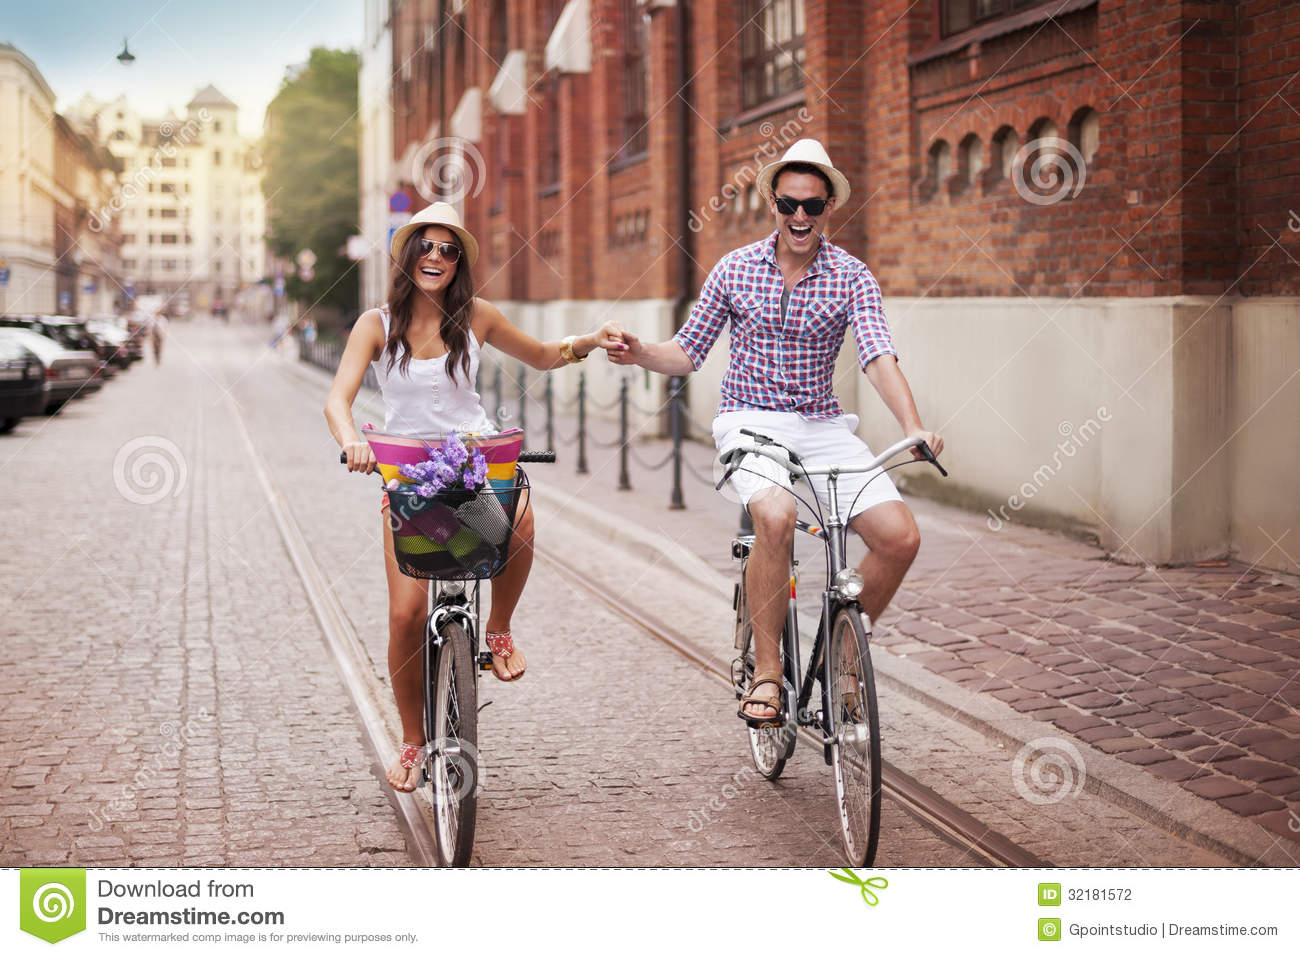 riding-bike-happy-young-couple-holding-hands-32181572.jpg